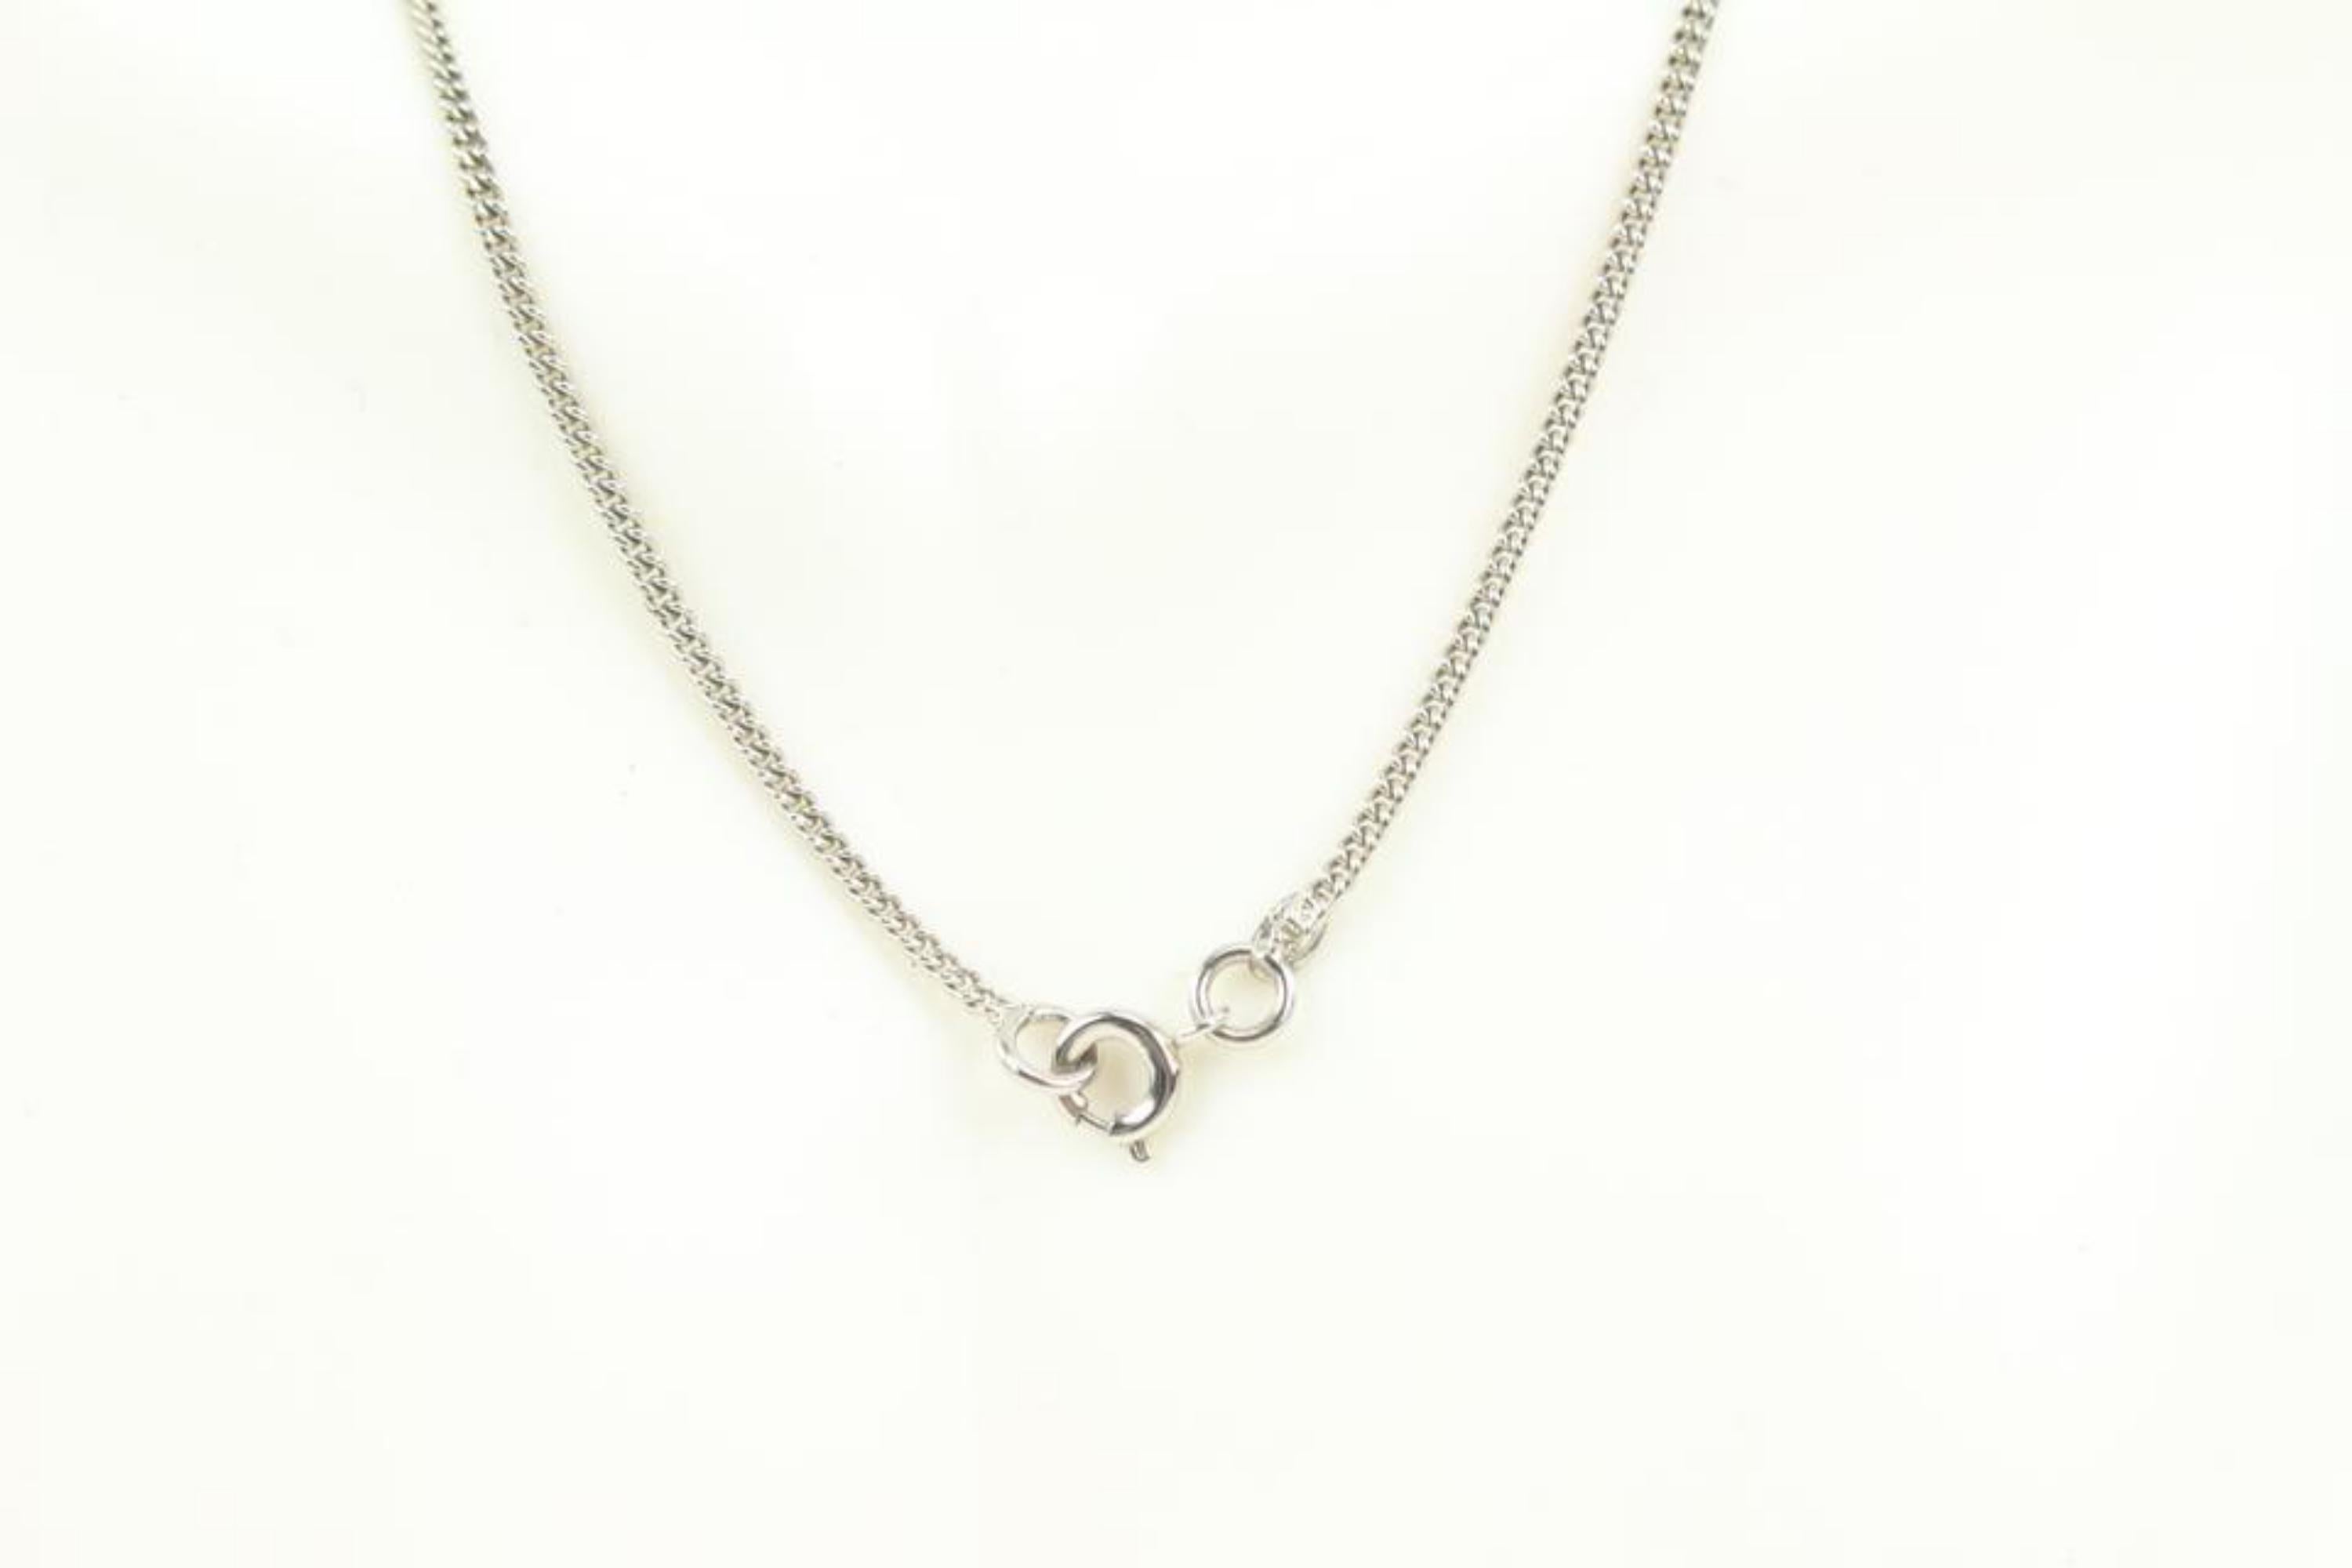 Chanel 04P Record Chain Necklace s210ck63 5